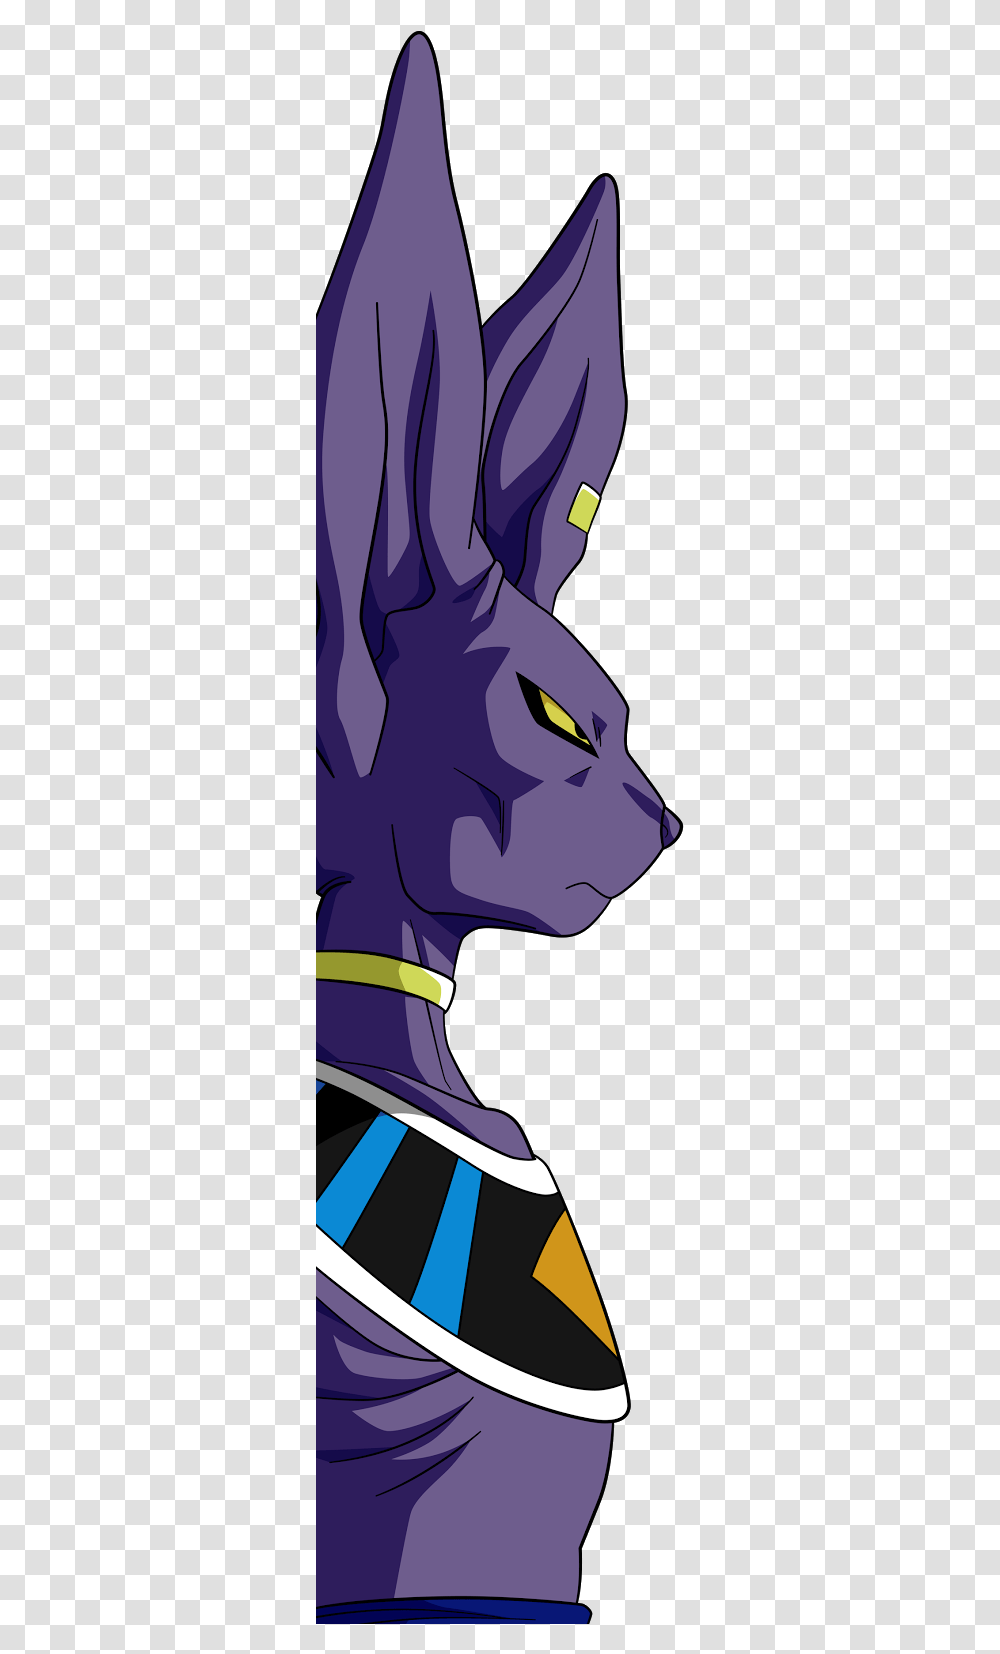 Lord Beerus God Of Destruction From Dbz Wallpapers De Dbs, Hand, Plant Transparent Png